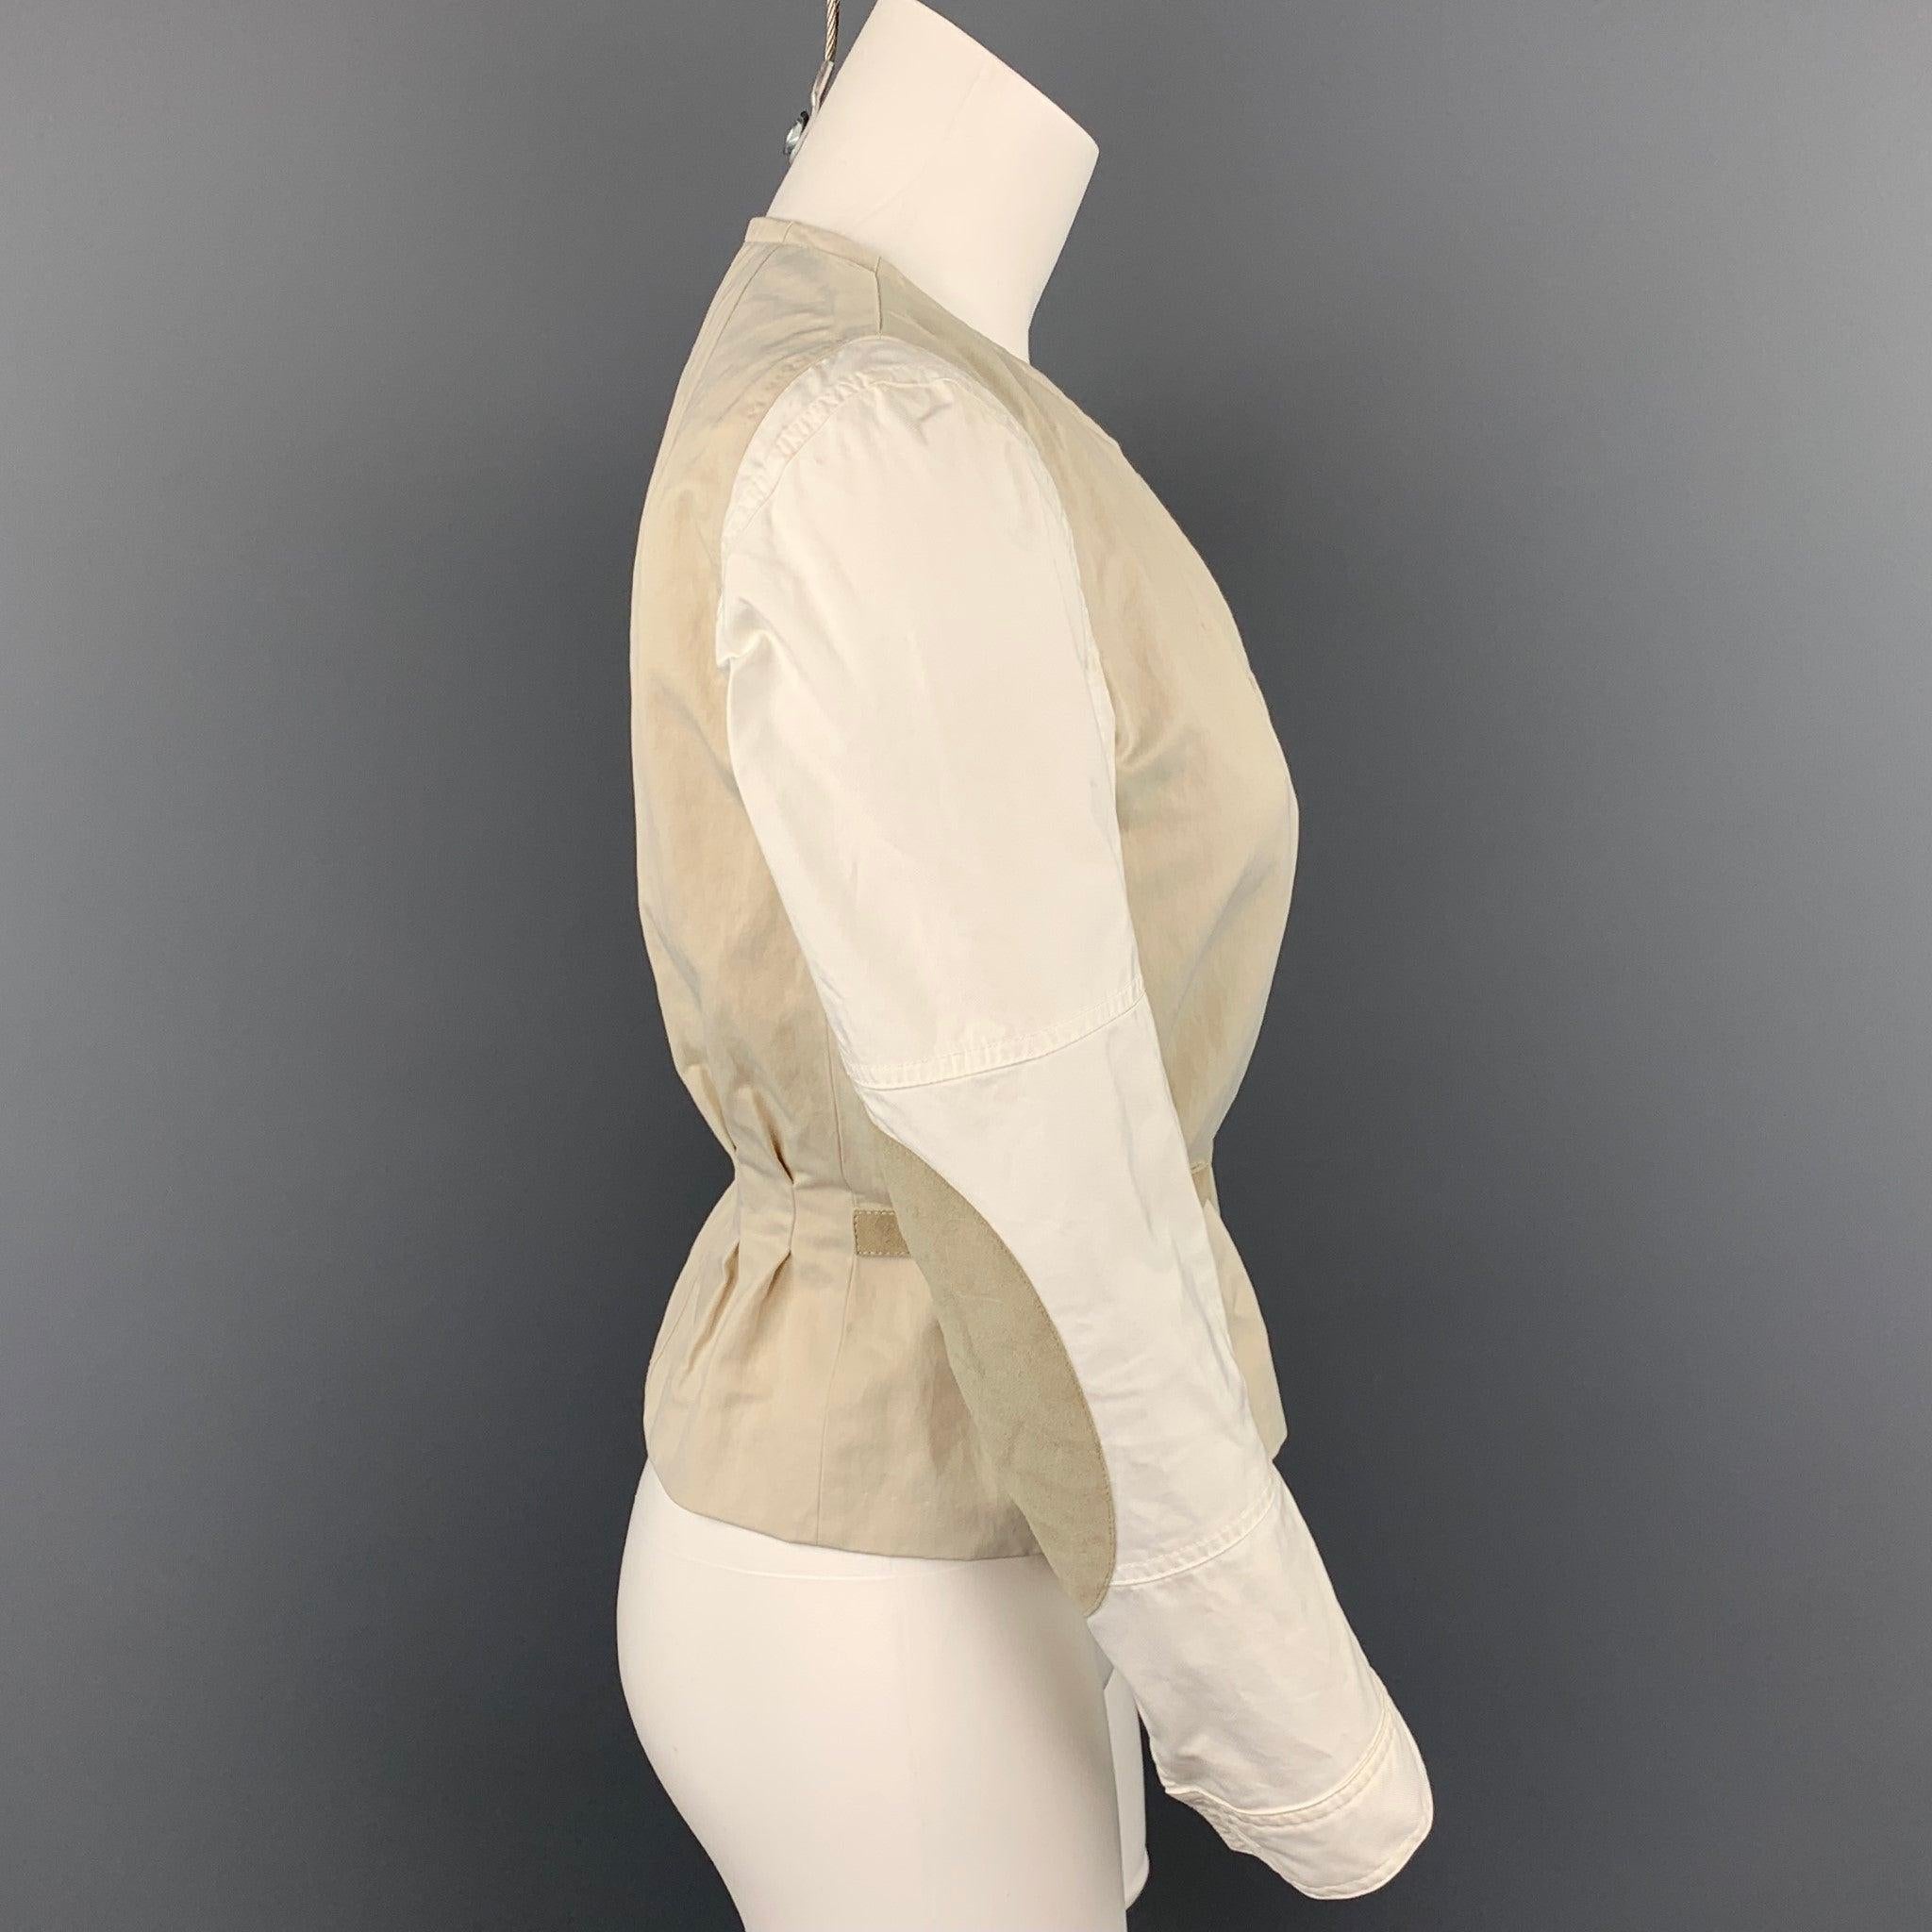 DRIES VAN NOTEN jacket comes in a off white polyester blend with a full liner featuring elbow patches, belted detail, slit pockets, and a snap button closure. Moderate wear.Good
Pre-Owned Condition. 

Marked:   36 

Measurements: 
 
Shoulder: 15